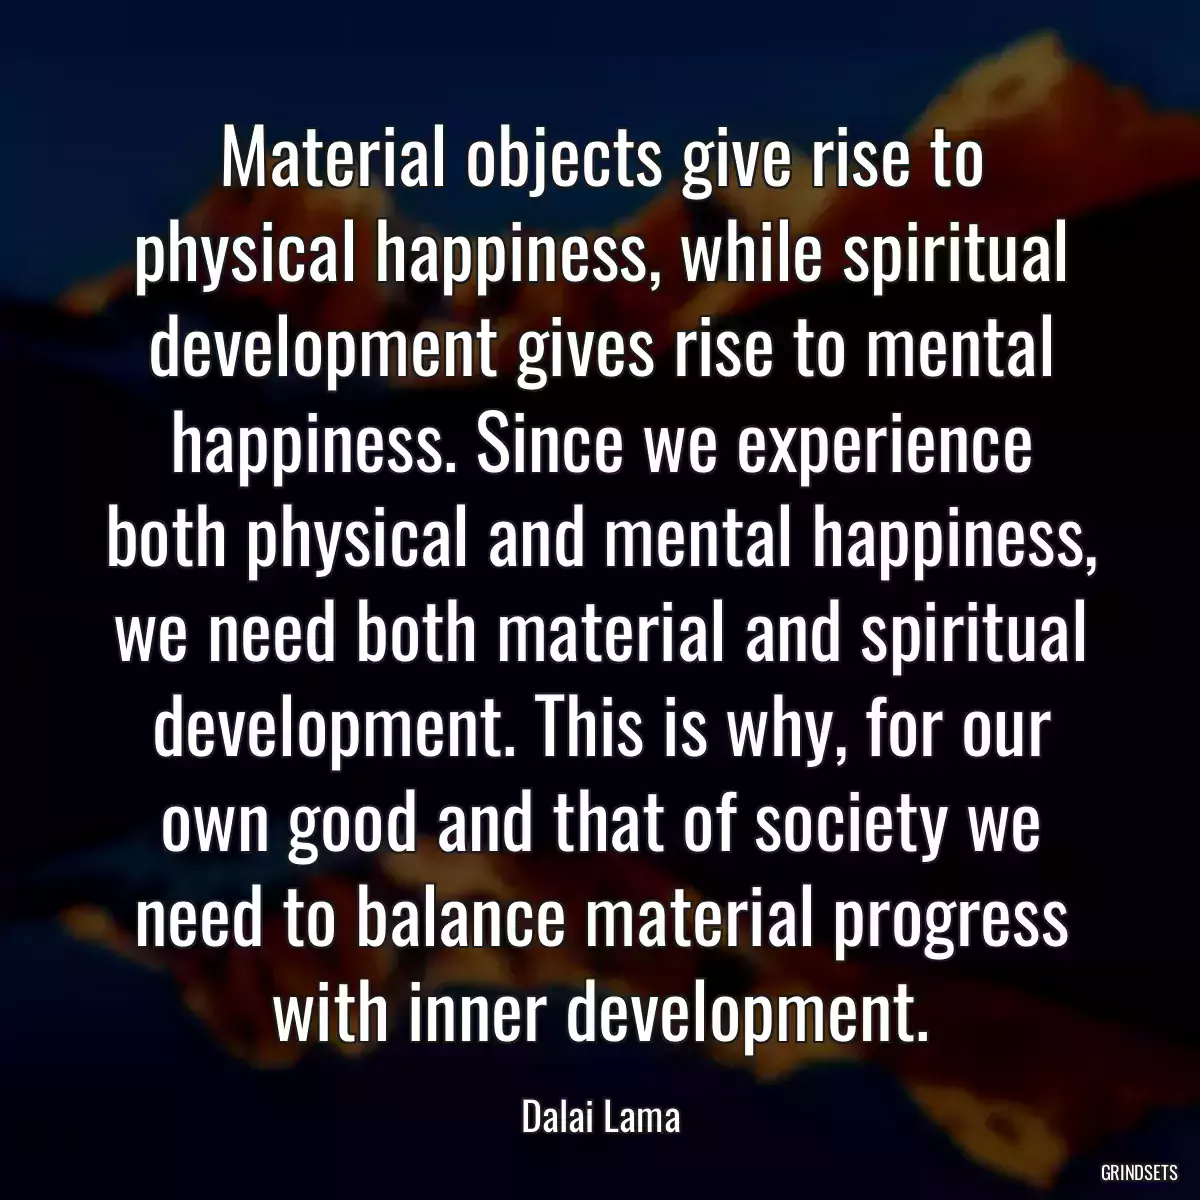 Material objects give rise to physical happiness, while spiritual development gives rise to mental happiness. Since we experience both physical and mental happiness, we need both material and spiritual development. This is why, for our own good and that of society we need to balance material progress with inner development.